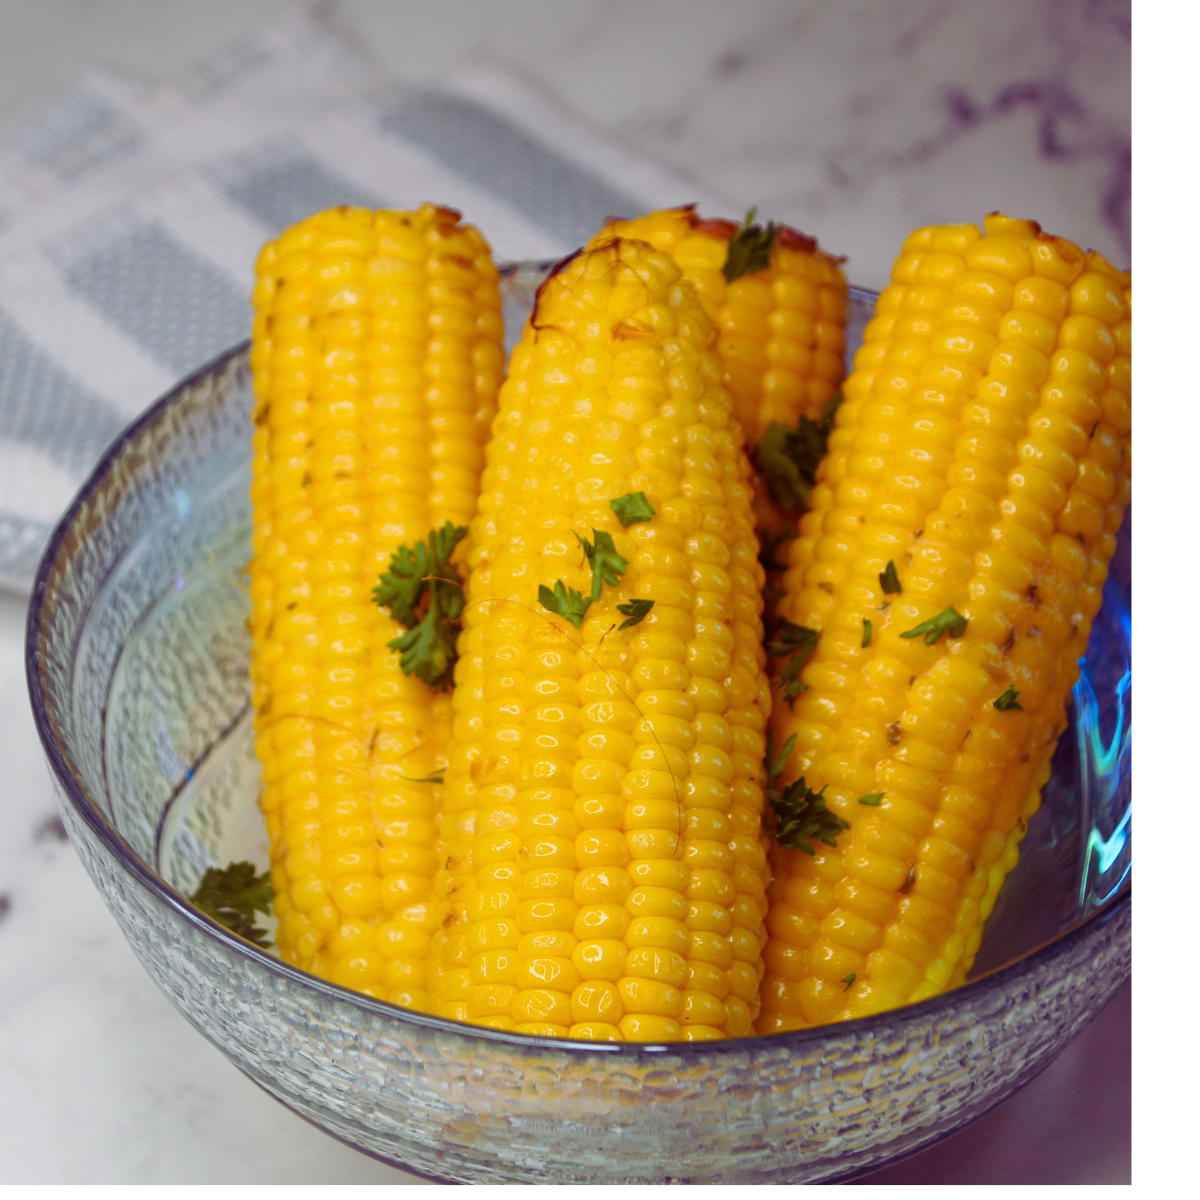 Are you looking for an easy and delicious summer side dish that will impress you? Look no further than this Ninja Foodi Grill Corn On The Cob recipe! This savory meal should be your go-to when needing a quick, fuss-free side.